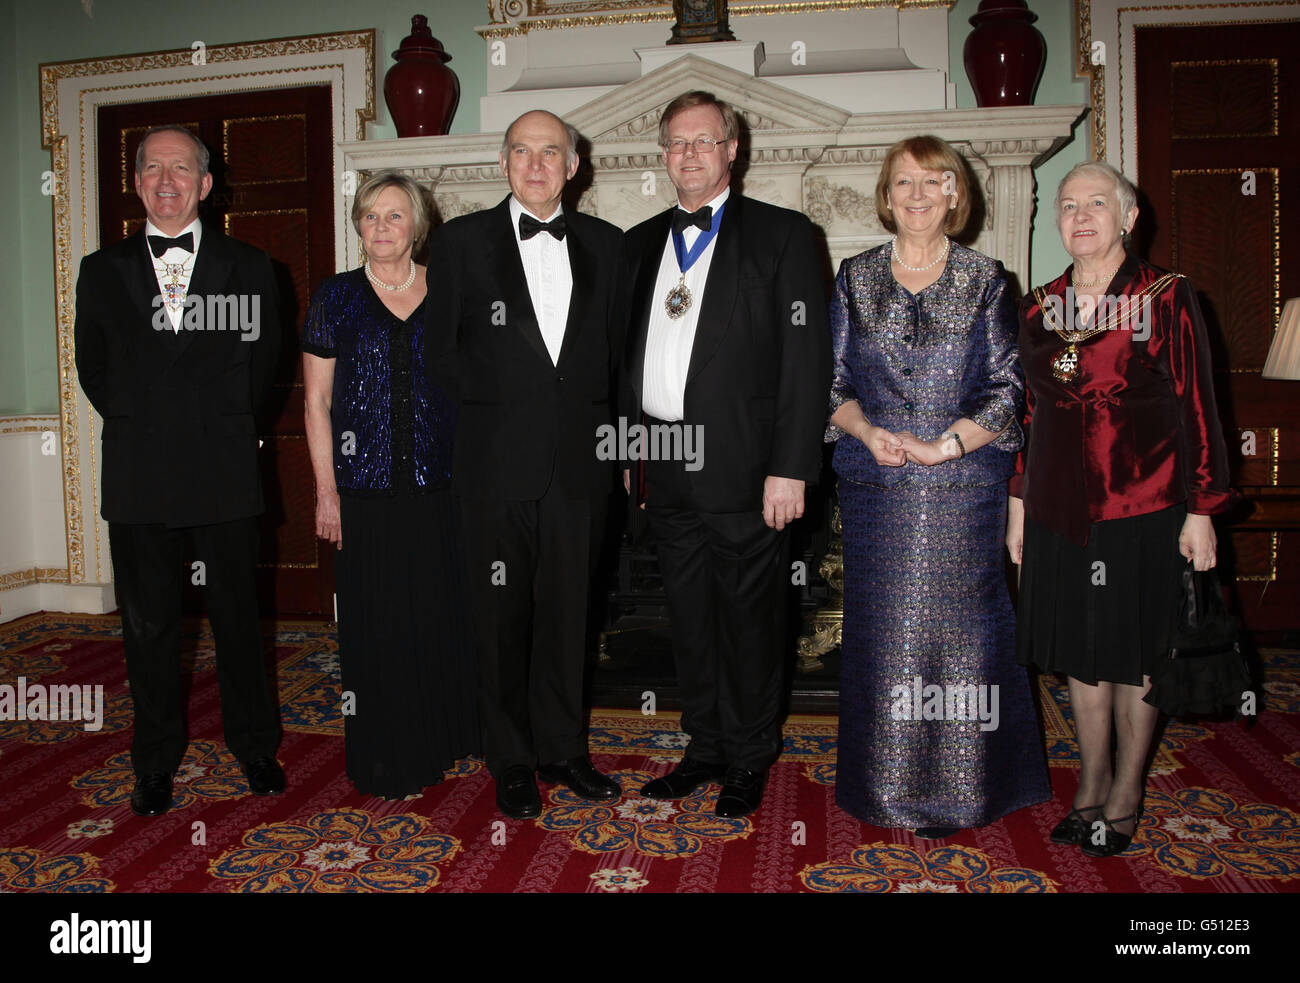 Sheriff Alderman Alan Jarrow (left), Business Secretary Vince Cable (third left) and his wife Rachel (second left), The Lord and Lady Mayor of the City of London, David Wootton (third right) and his wife Liz (second right), and Sheriff Wendy Mead (right). during the annual Trade and Industry Dinner, at Mansion House in the City of London. Stock Photo